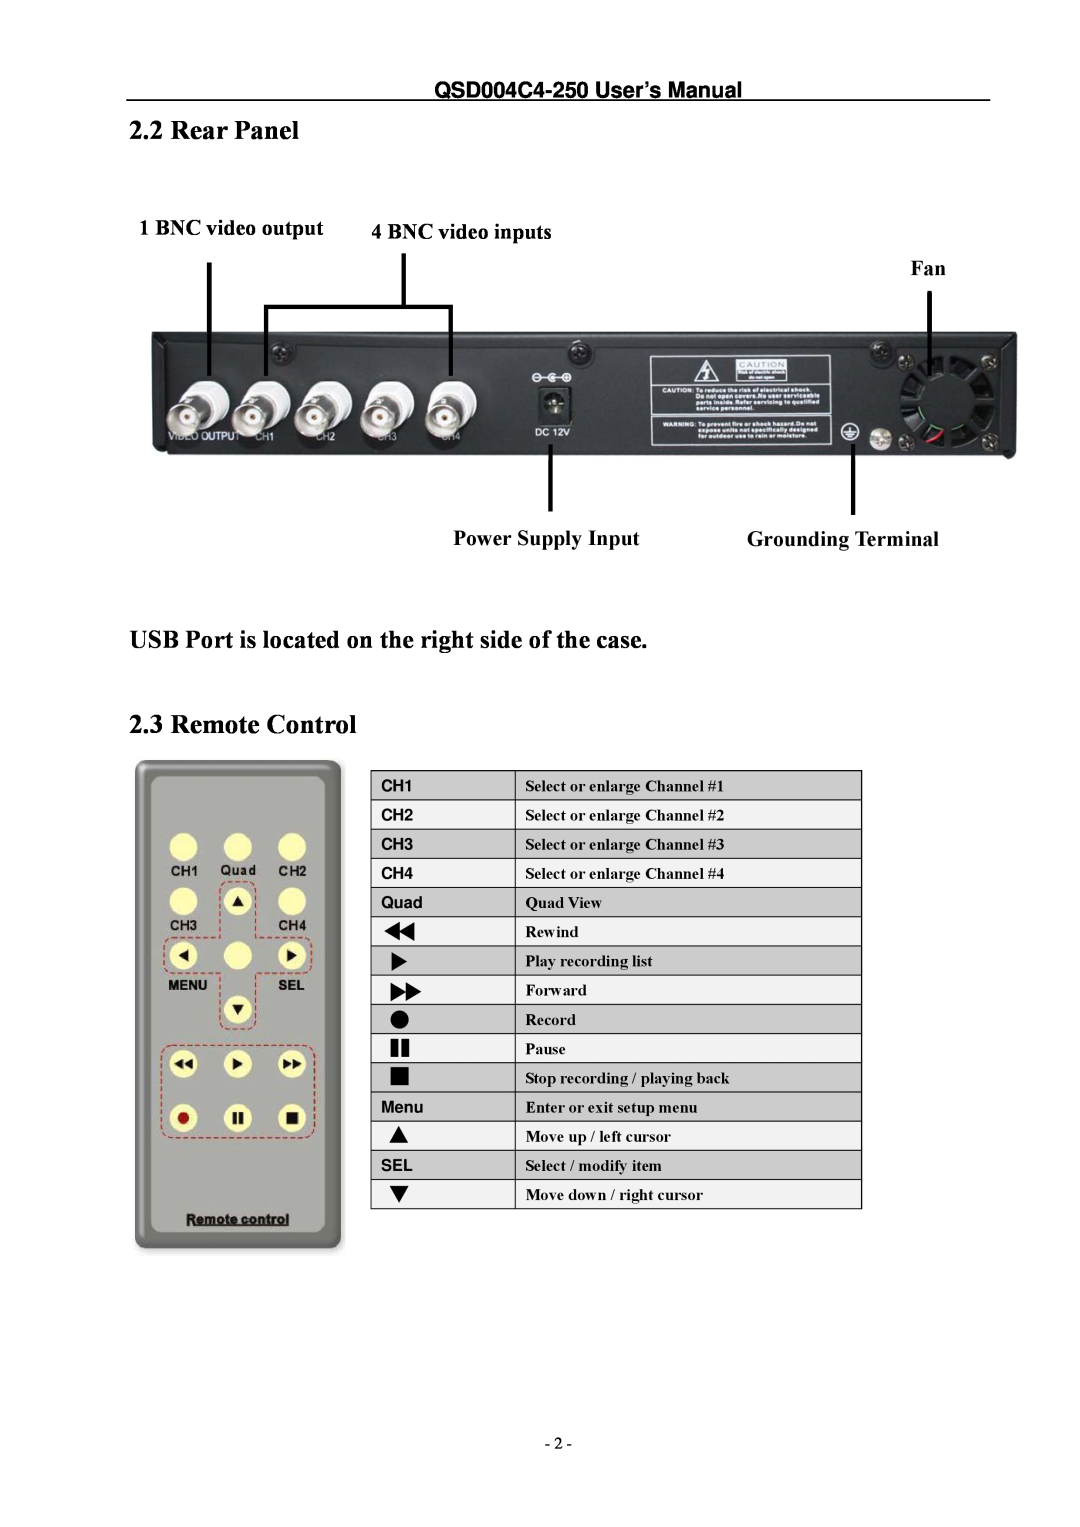 Q-See QSD004C4-250 Rear Panel, Remote Control, BNC video output, BNC video inputs, Power Supply Input, Grounding Terminal 